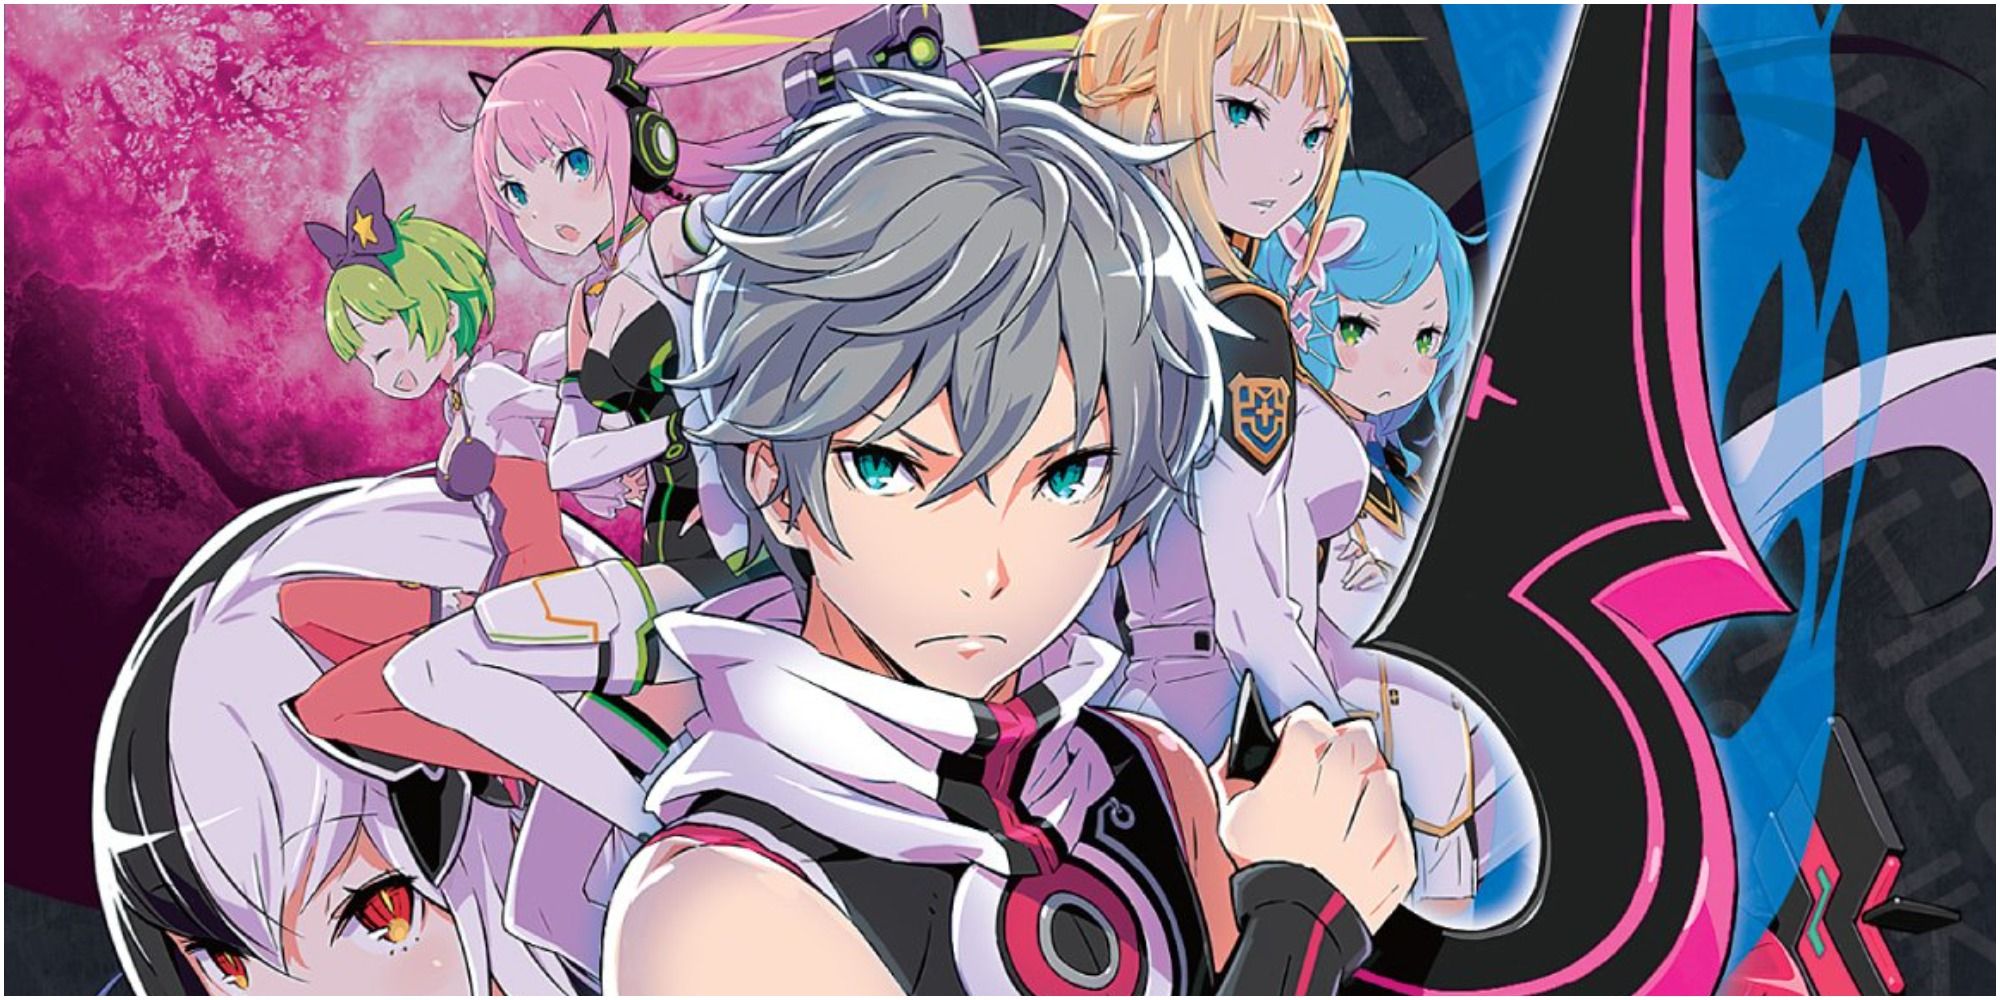 conception 2 cover art with protagonist